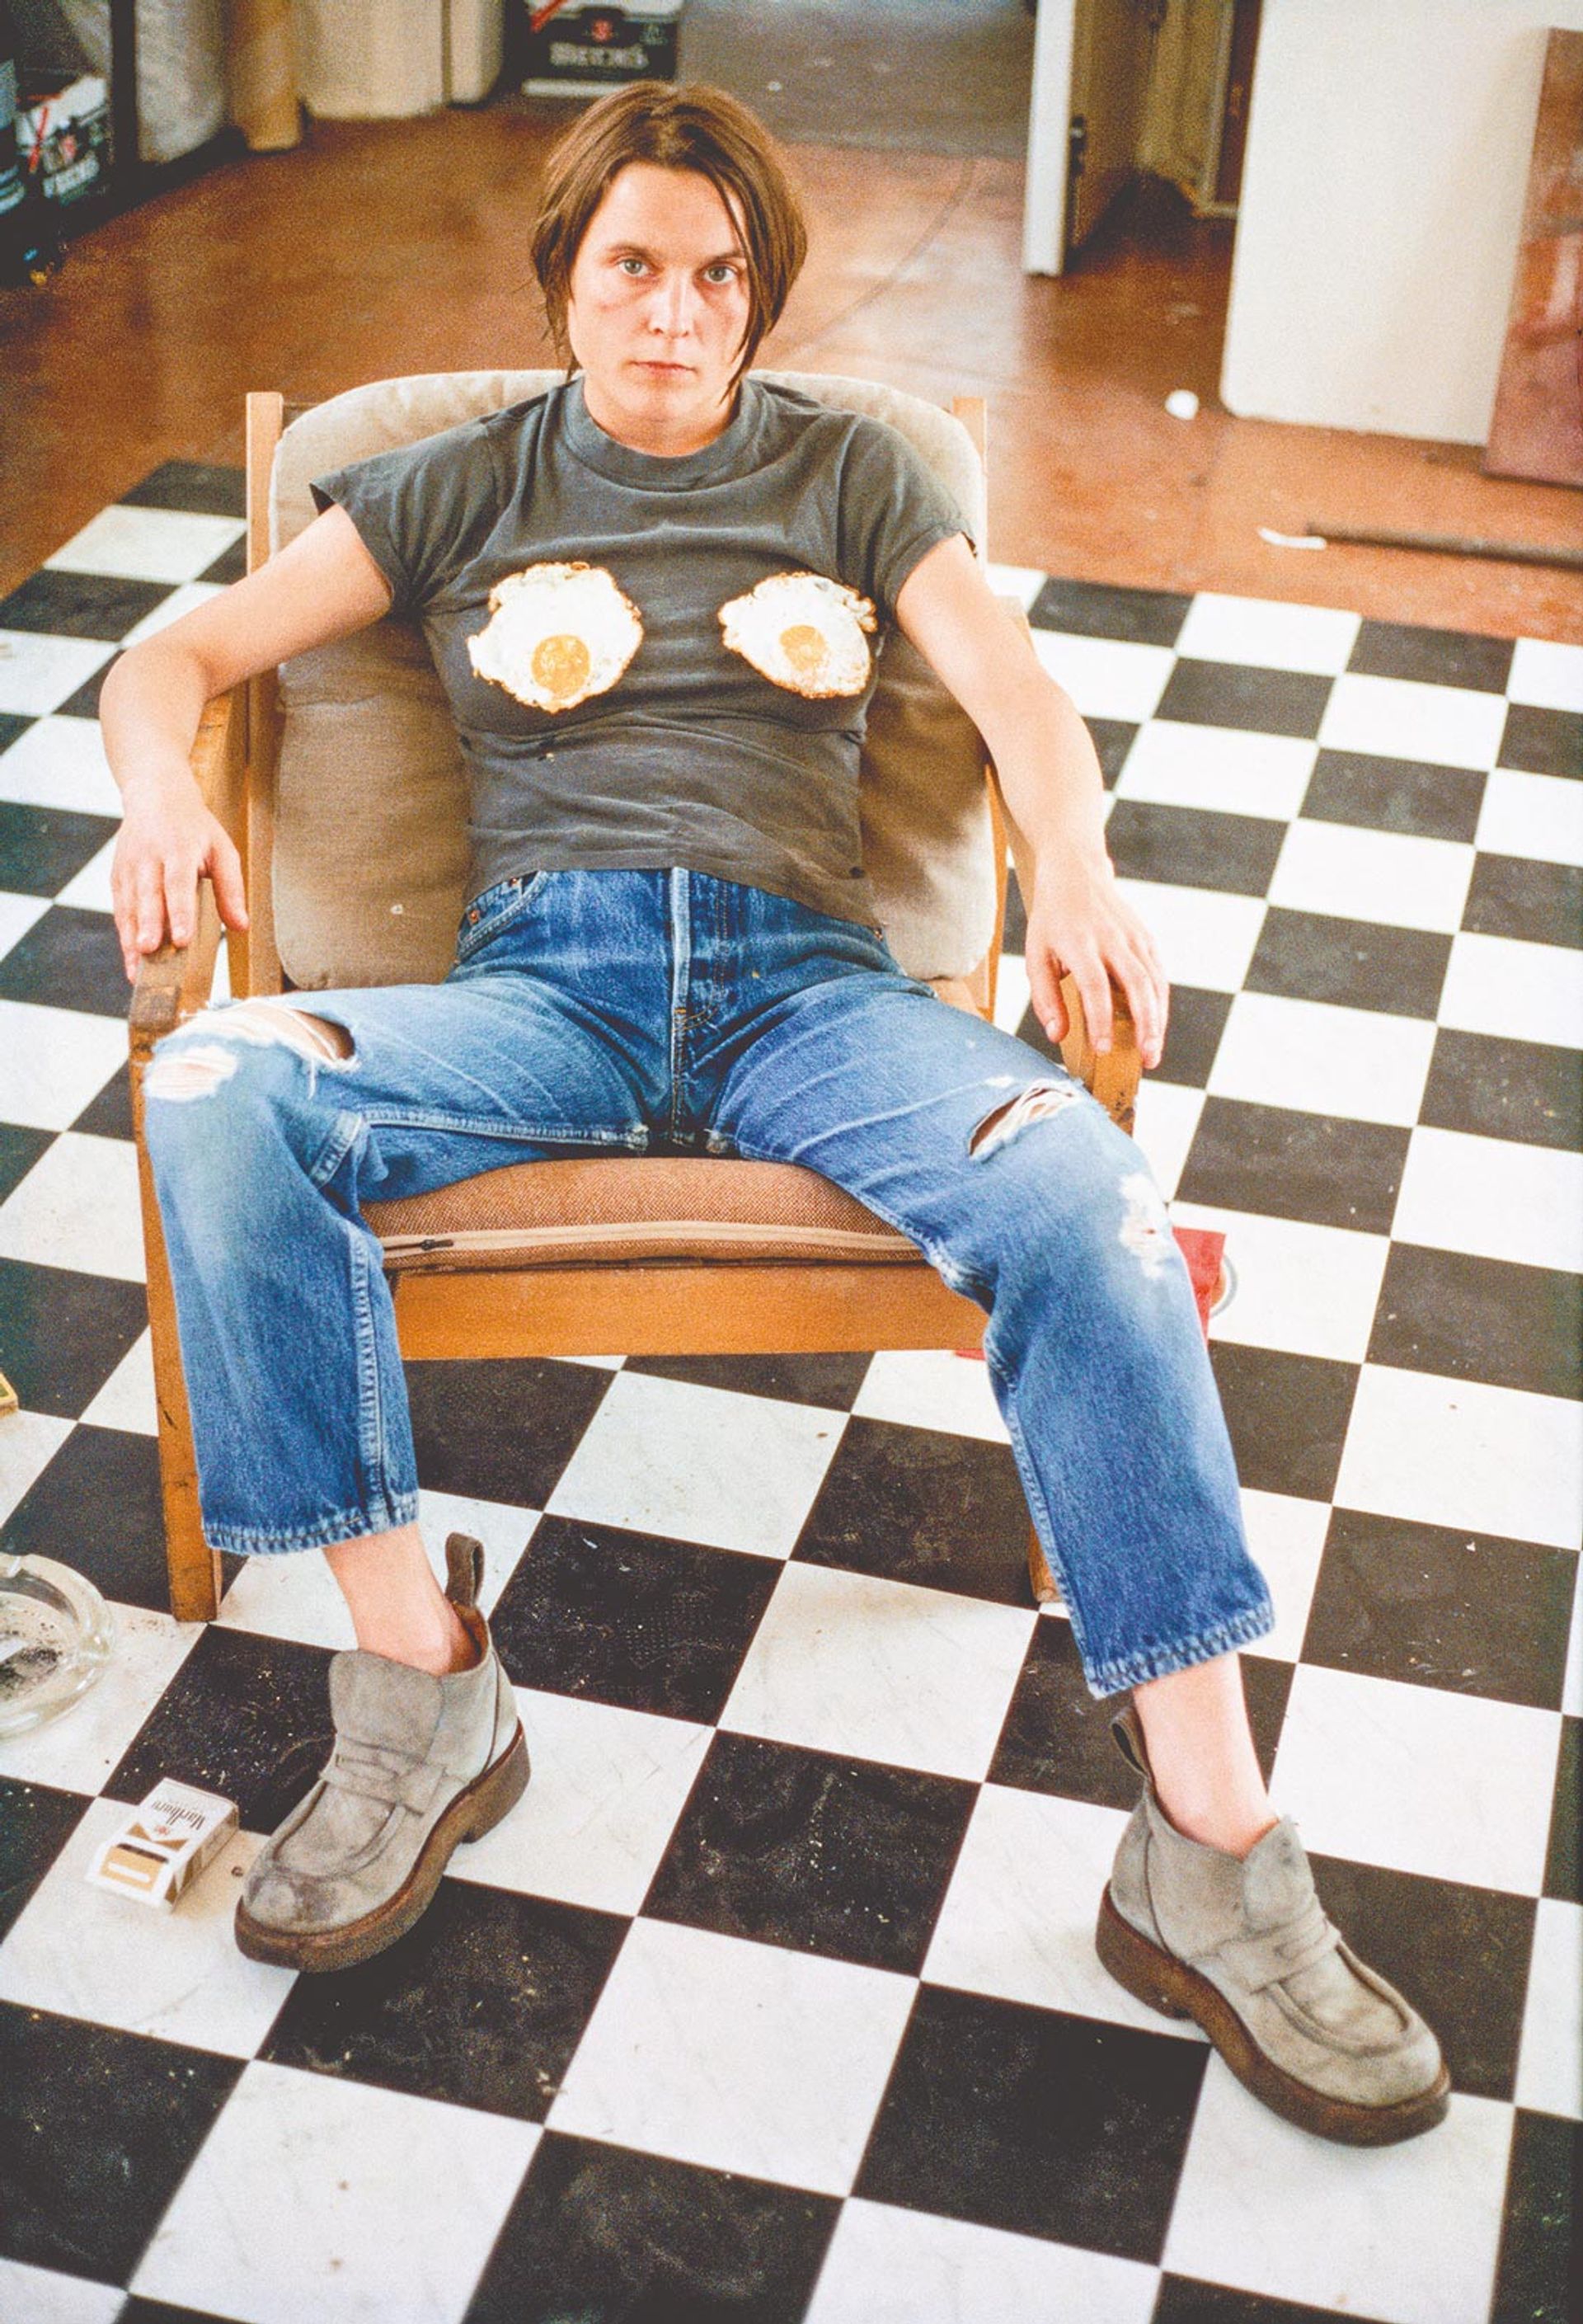 Sarah Lucas’s Self Portrait with Fried Eggs (1996) Courtesy of Sarah Lucas and Sadie Coles HQ